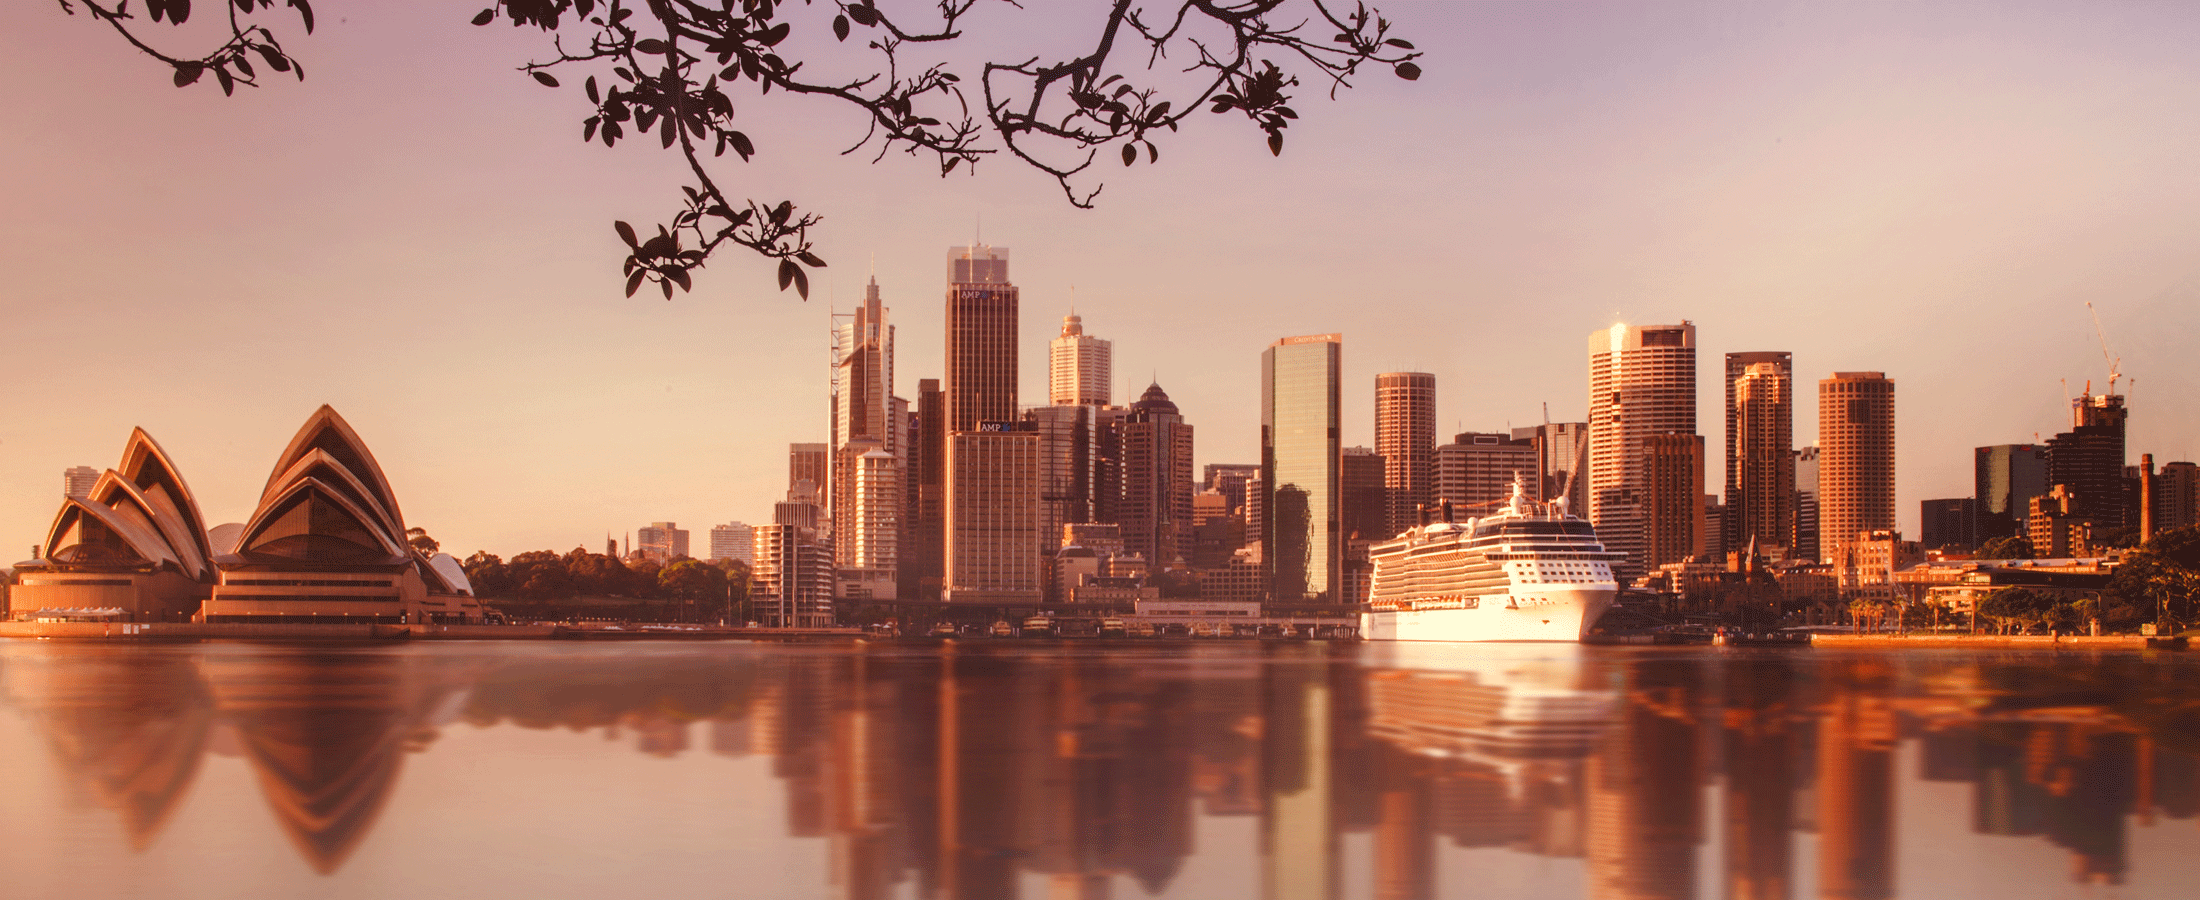 sydney harbour with cruise ship on water